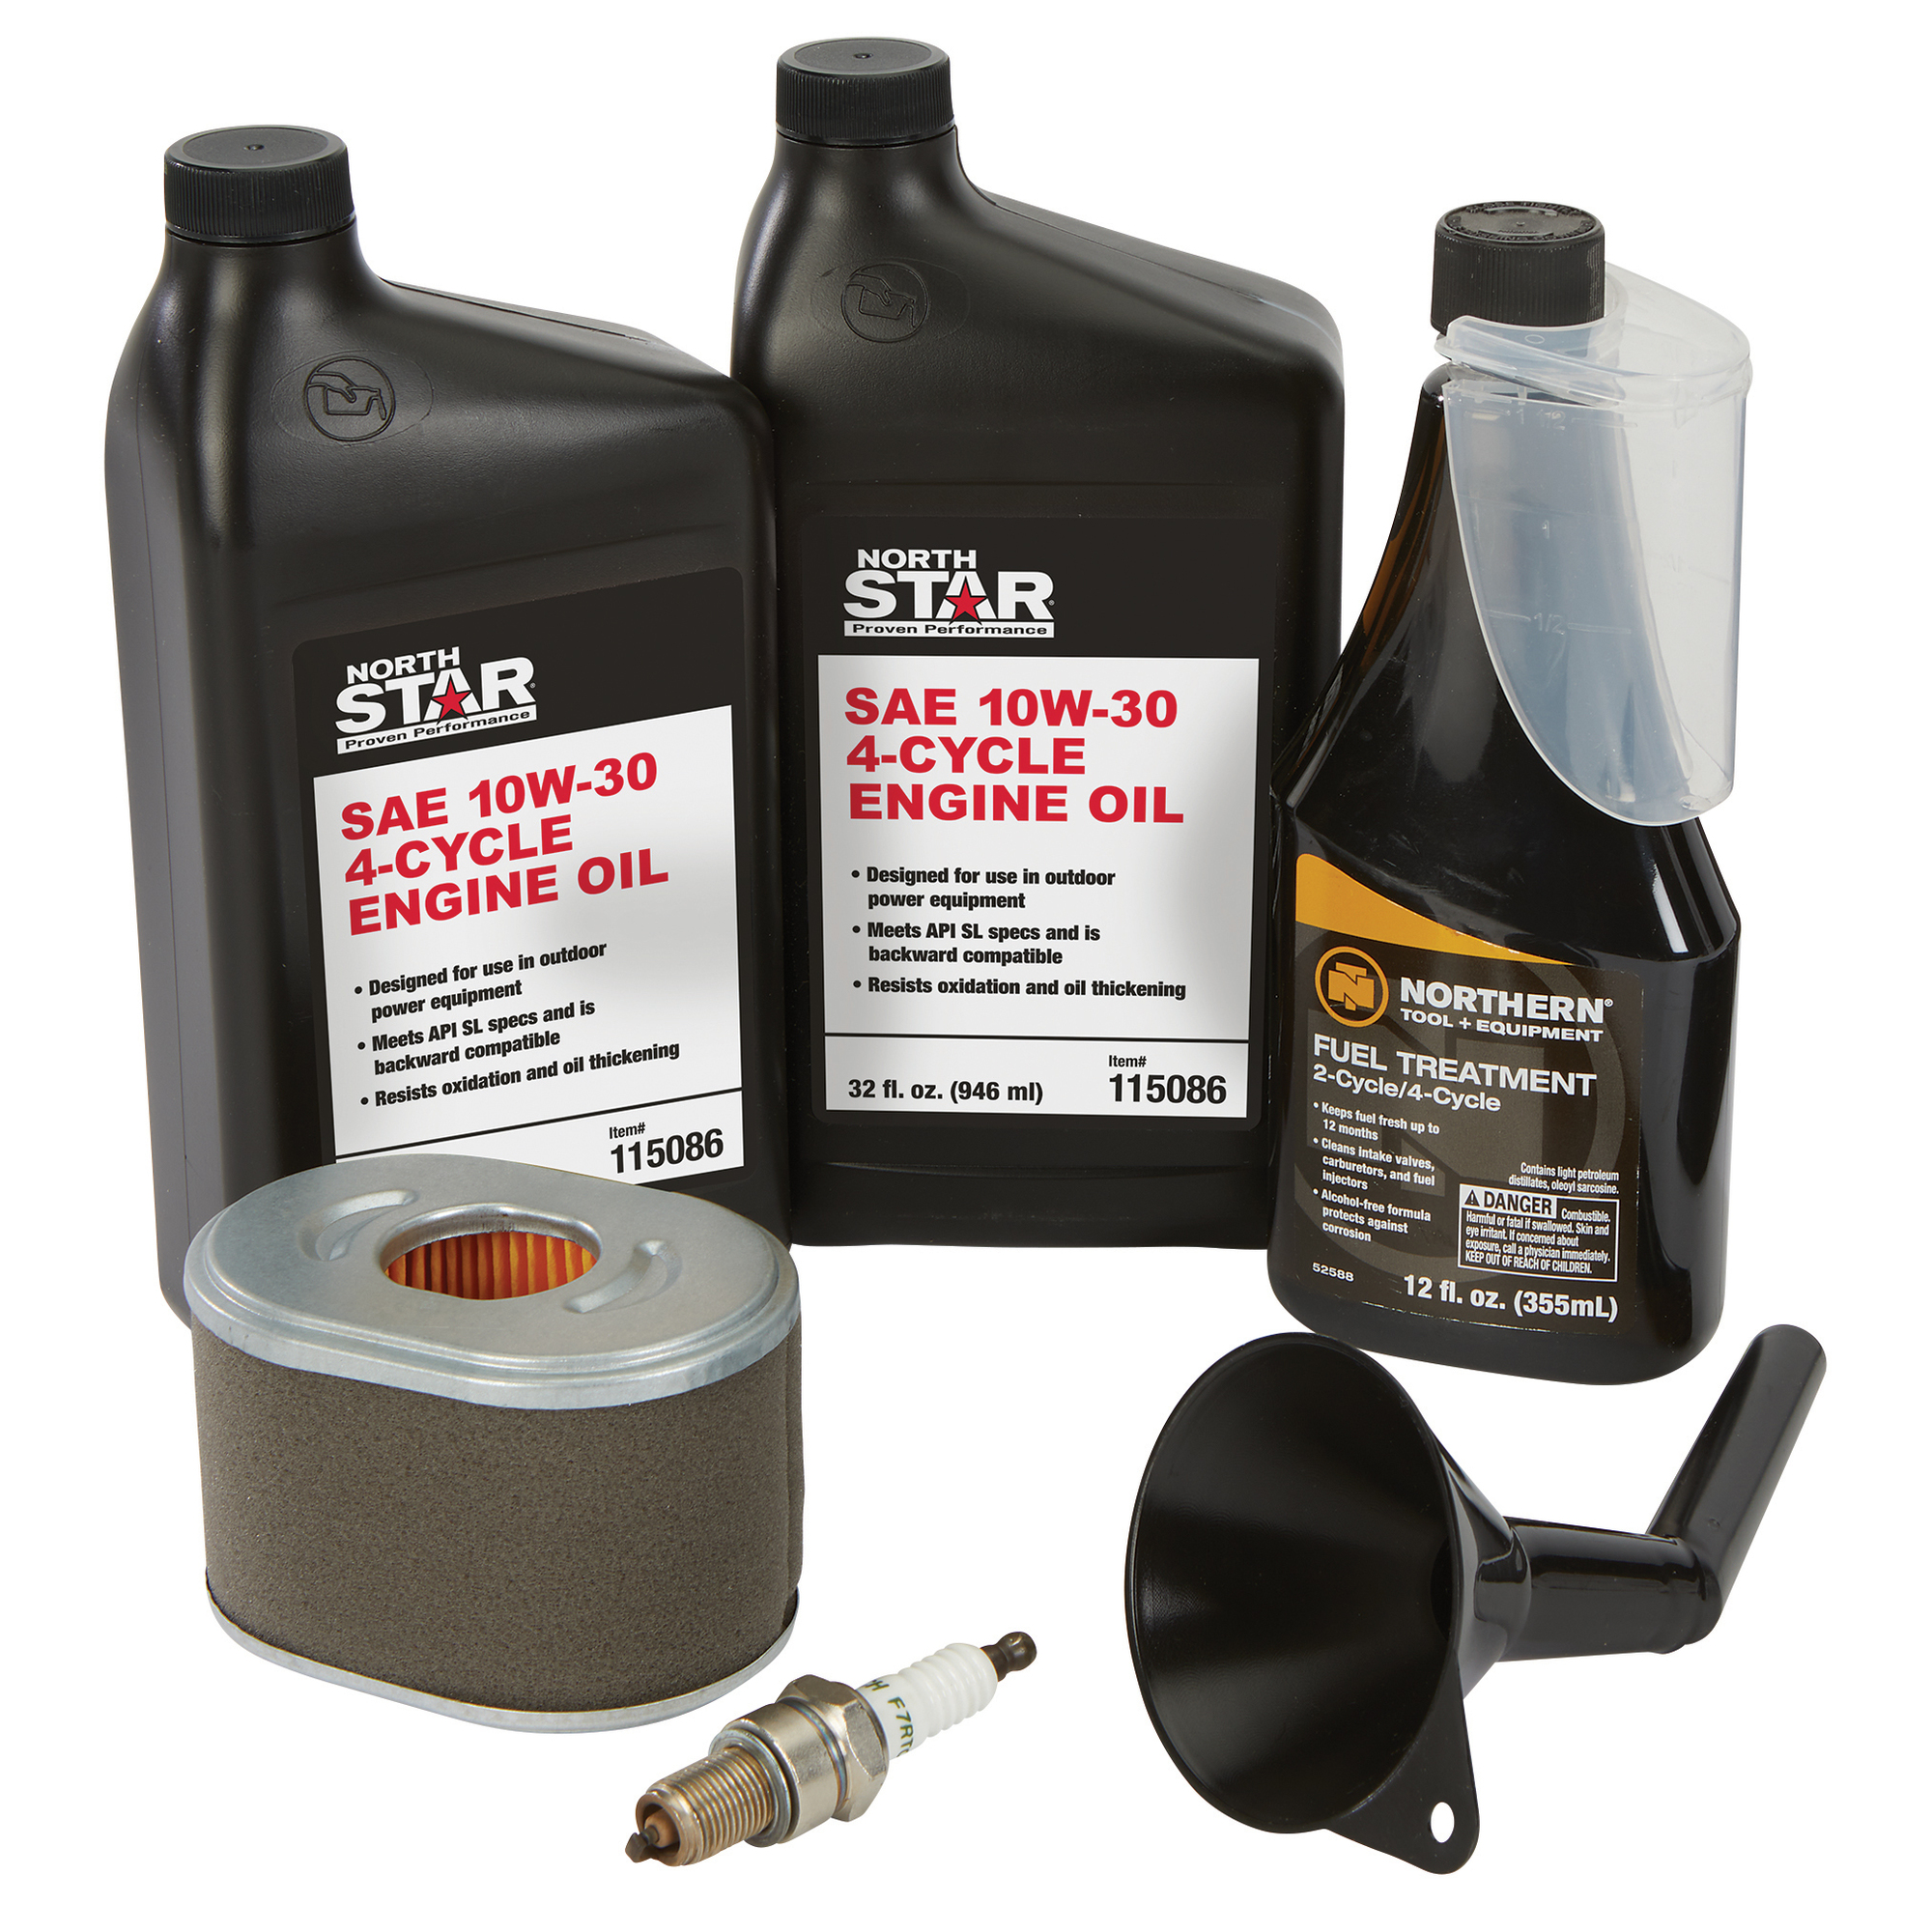 NorthStar Maintenance Kit for NorthStar 180CC and 225CC Engines, 2 Qts. 10/30W Oil, 8-Oz. Fuel Additive, Funnel, Filter and Spark Plug, Model 805642